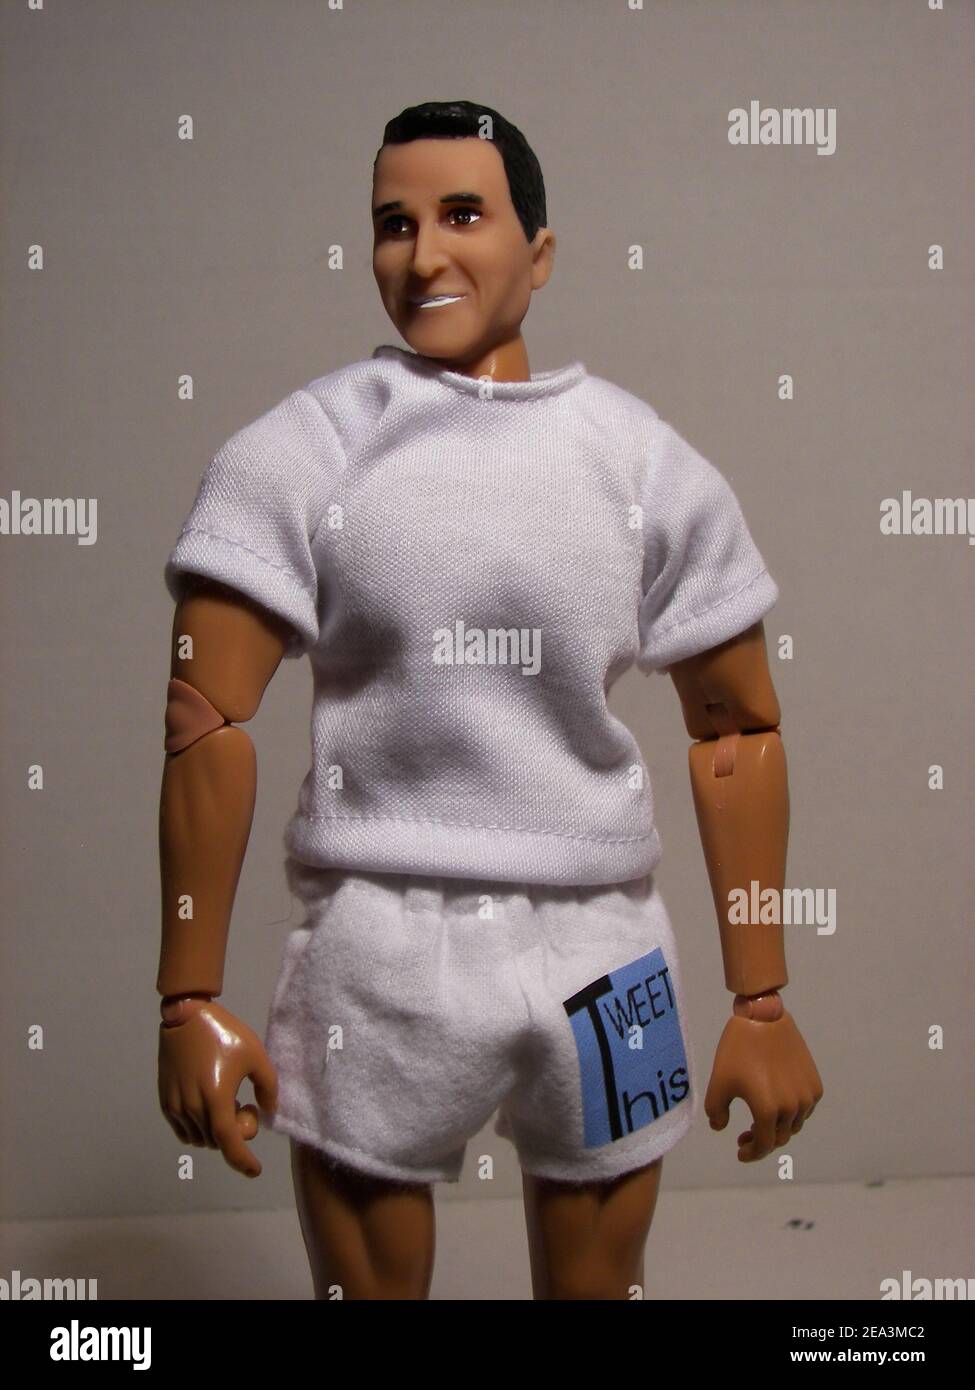 Connecticut-based company, Herobuilders.com has produced an 'anatomically correct' new action figure doll of Rep. Anthony Weiner, who was caught in a sexting scandal. The action figure went on sale yesterday for $49.95, and comes 'fully equipped with a crotch bulge'. An un-censored version exists as well which retails for $39.95 on June 14, 2011. Photo by Herobuilders.Com/ABACAUSA.COM Stock Photo